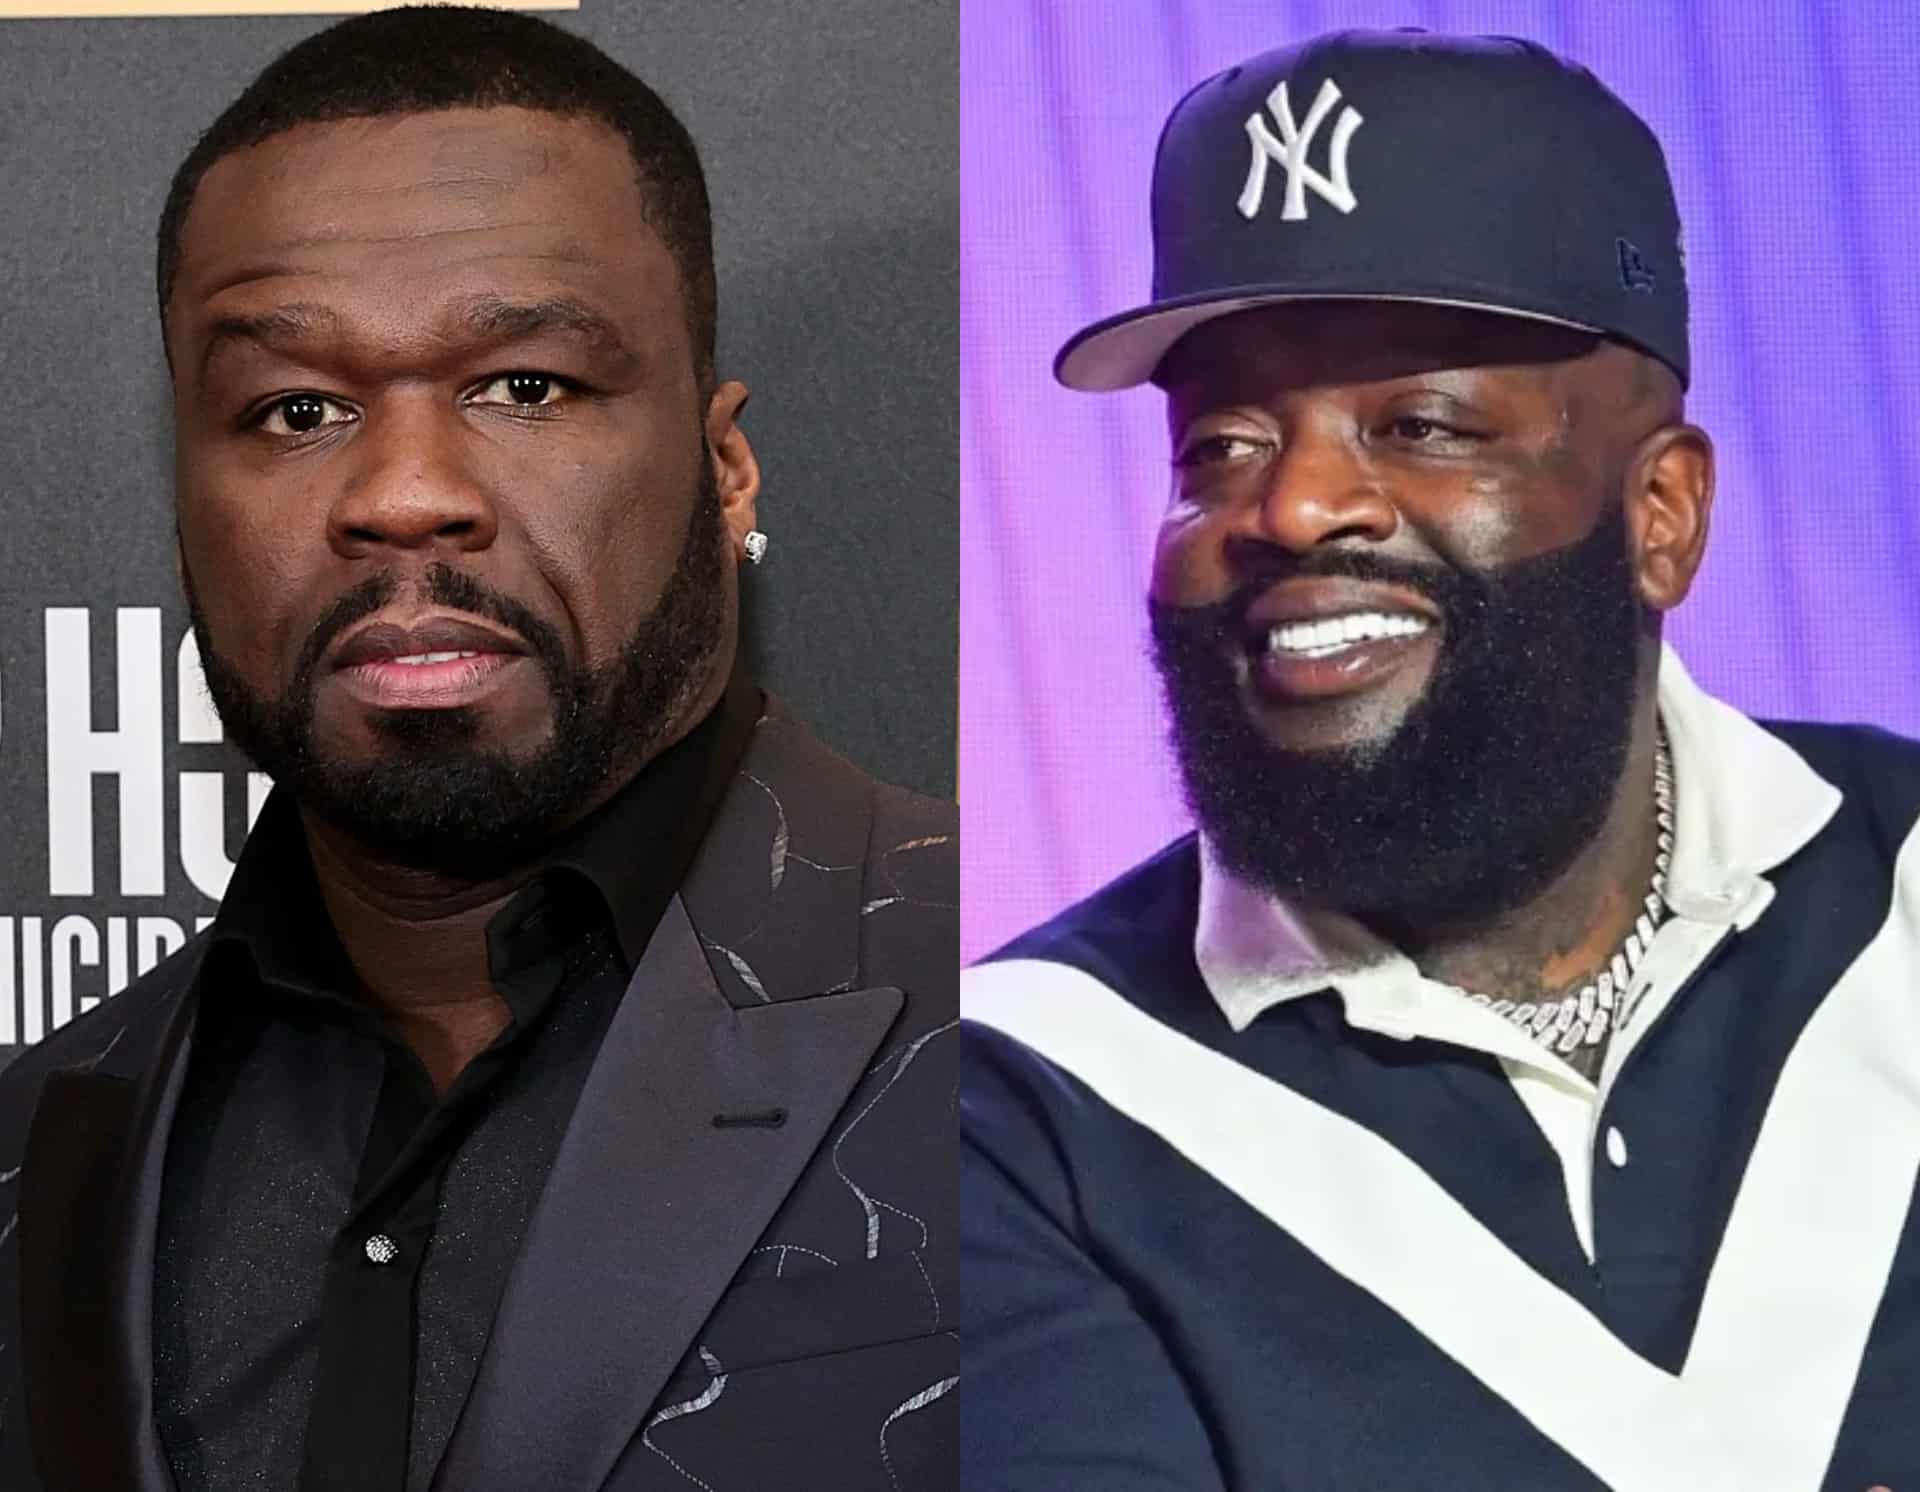 Rick Ross Takes Shots At 50 Cent After Being Mocked For Low Album Sales